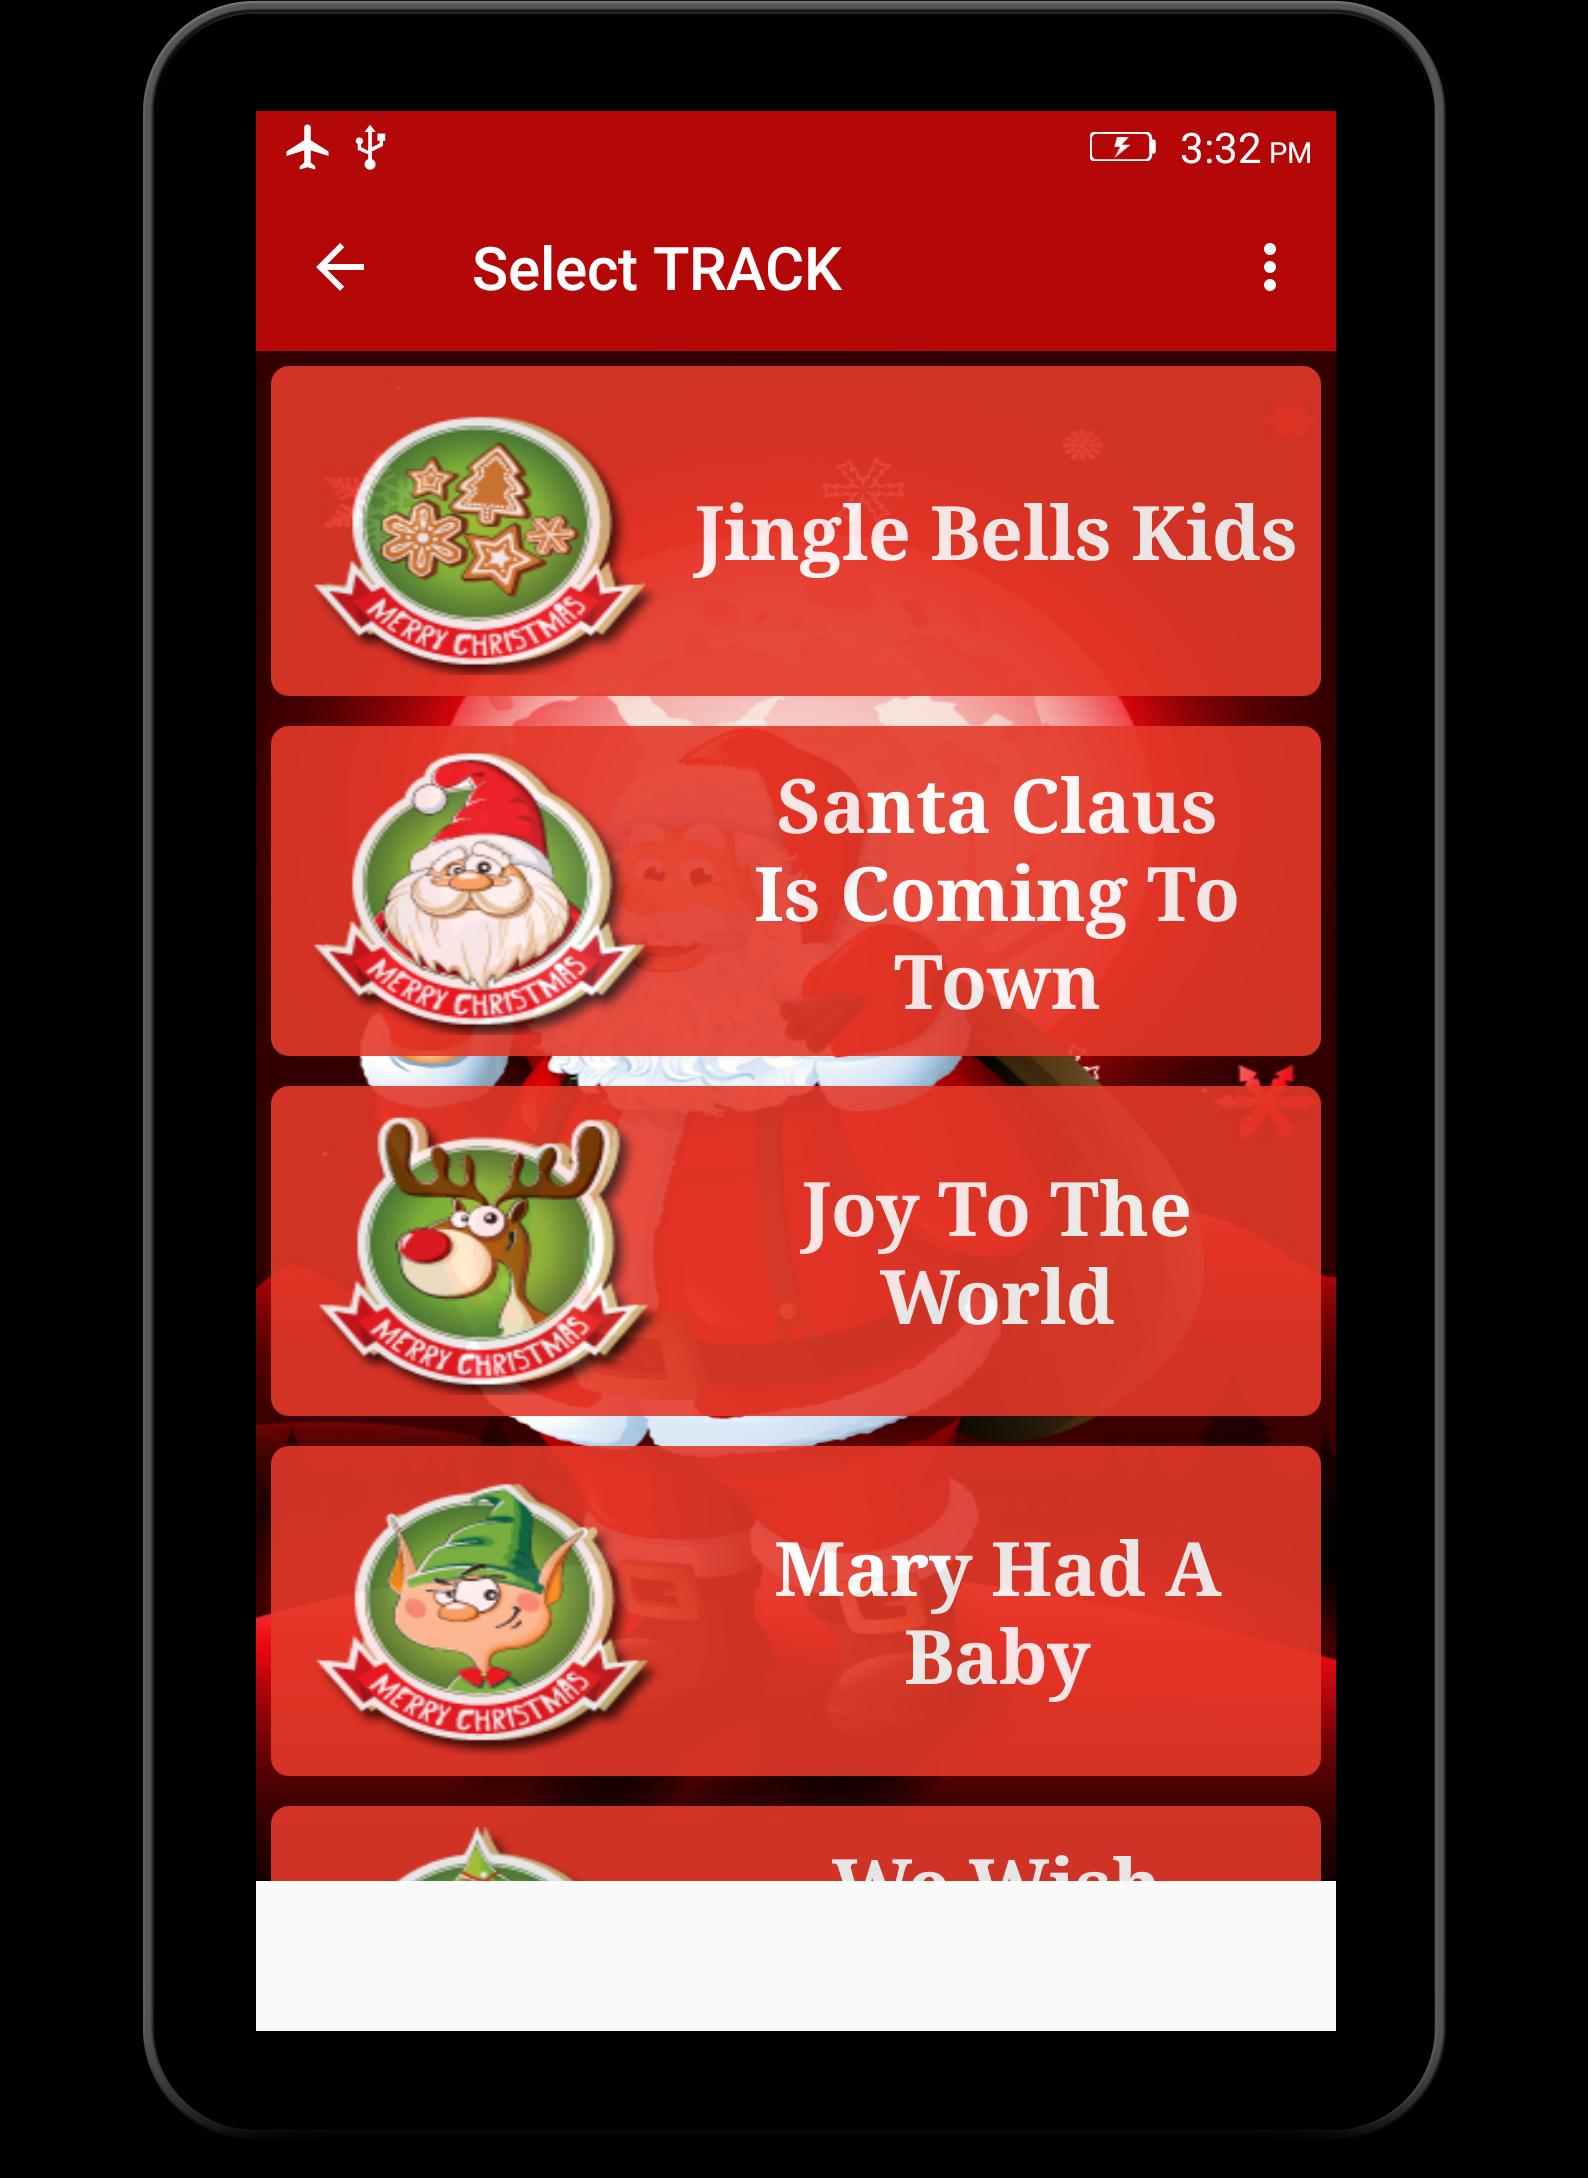 Christmas Carol Songs Hd For Android Apk Download